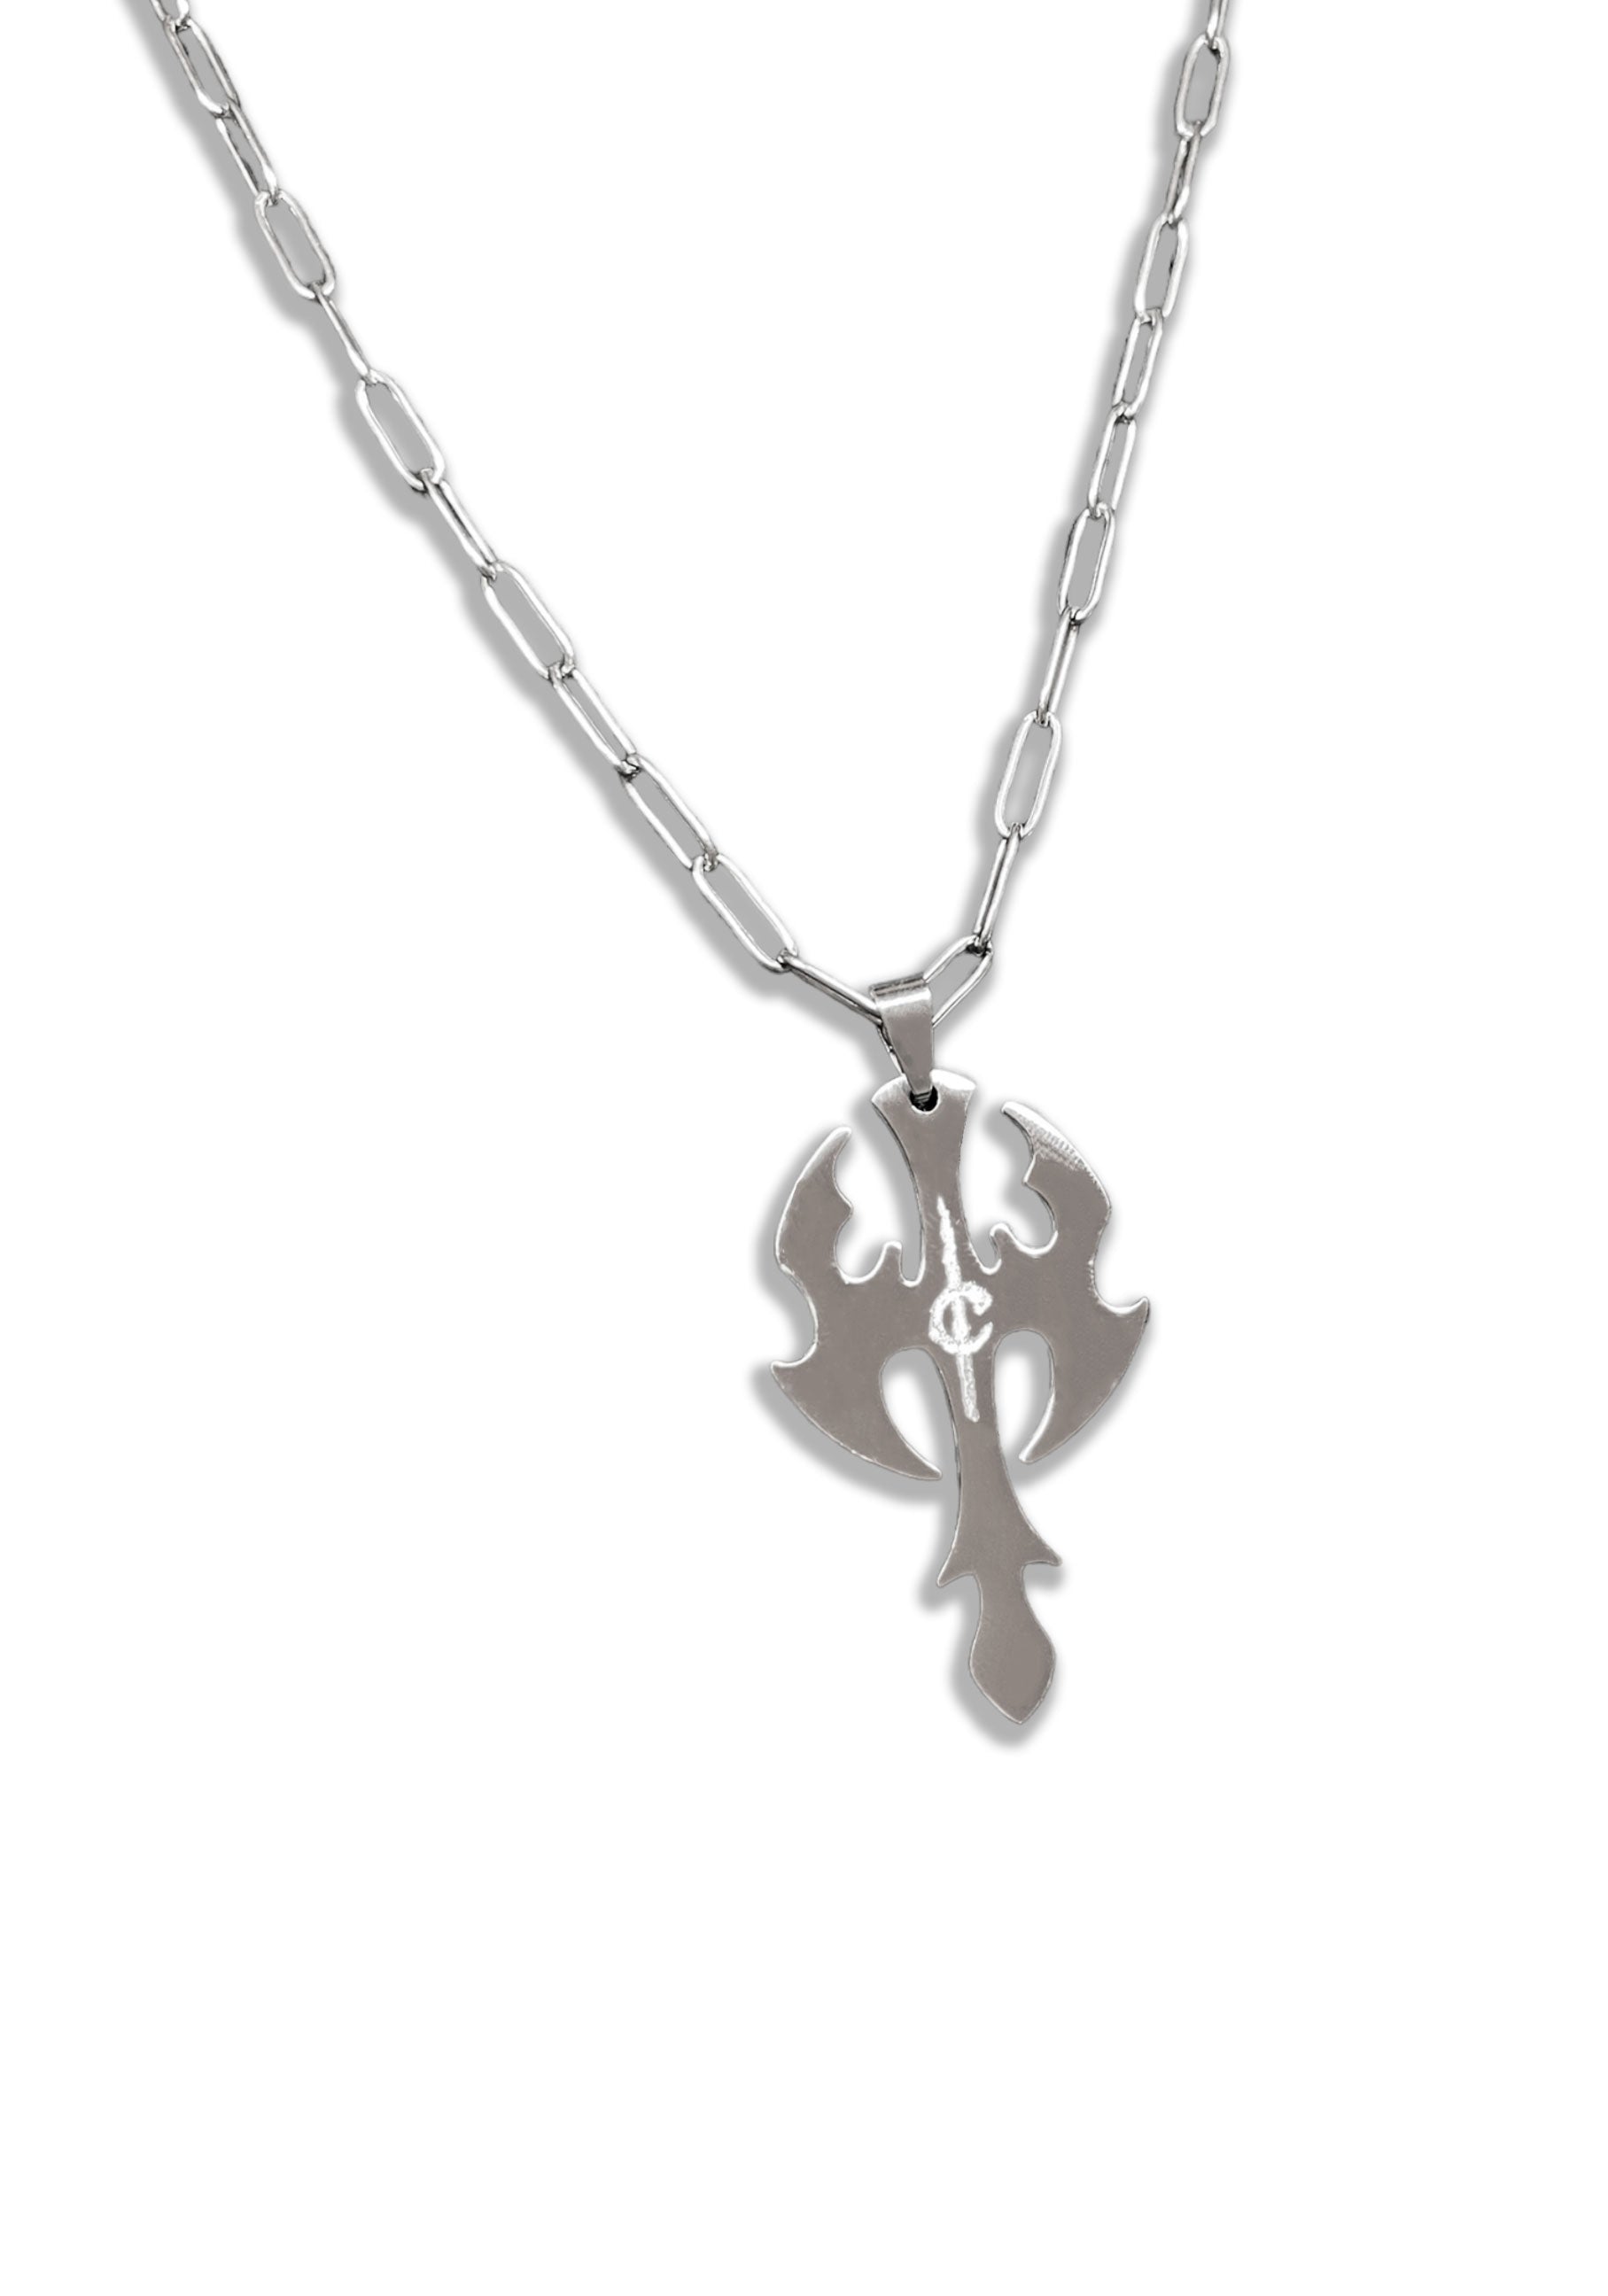 WEAPON STAINLESS STEEL NECKLACE